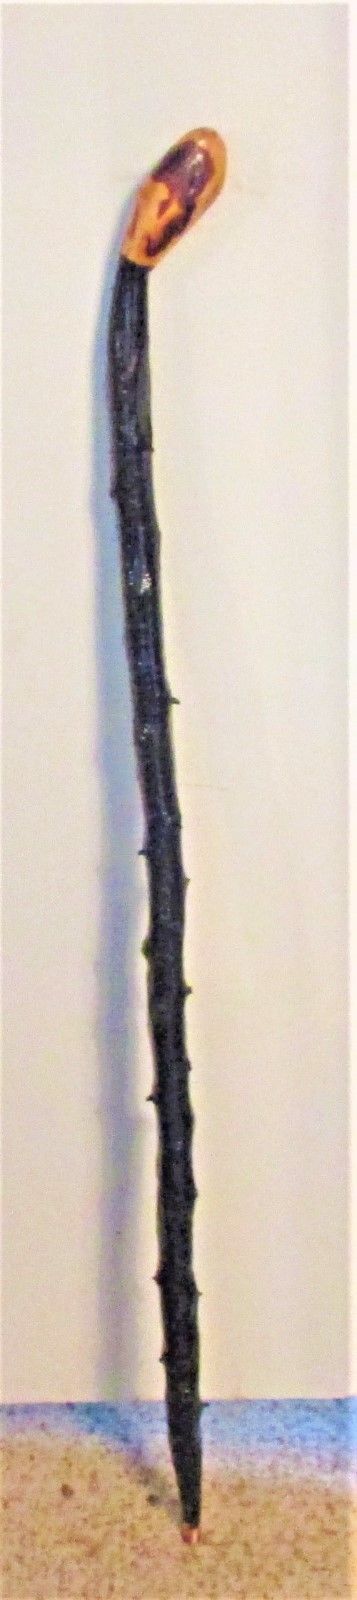 FROM IRELAND THE IRISH SHILLELAGH BLACKTHORN WALKING STICK HARVESTED BY THE FARM